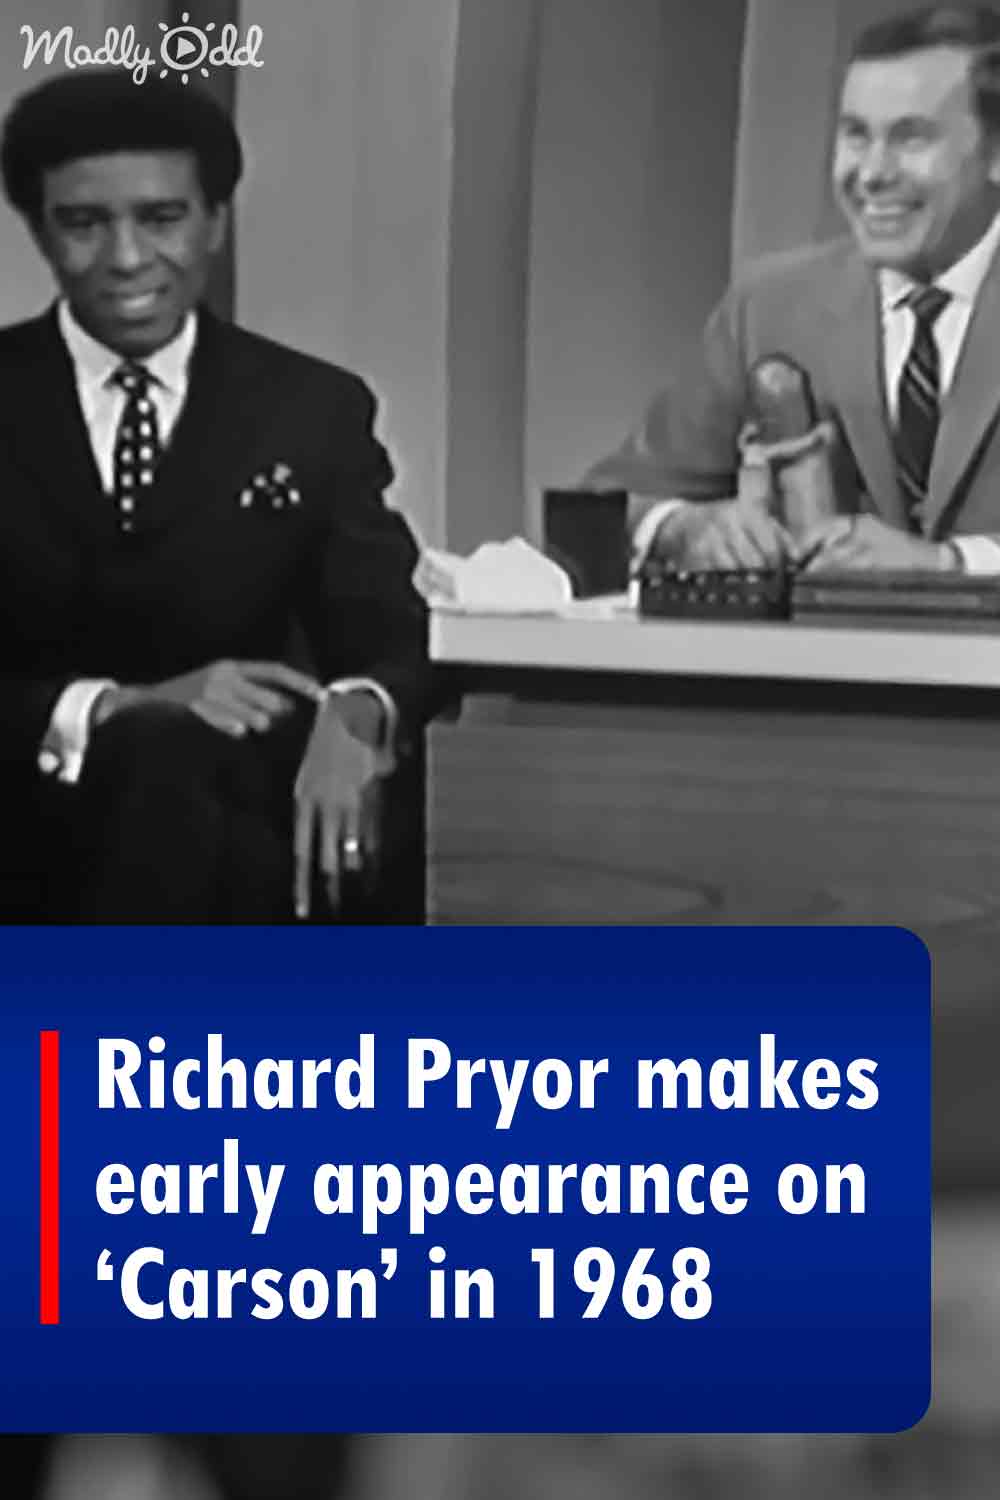 Richard Pryor makes early appearance on ‘Carson’ in 1968